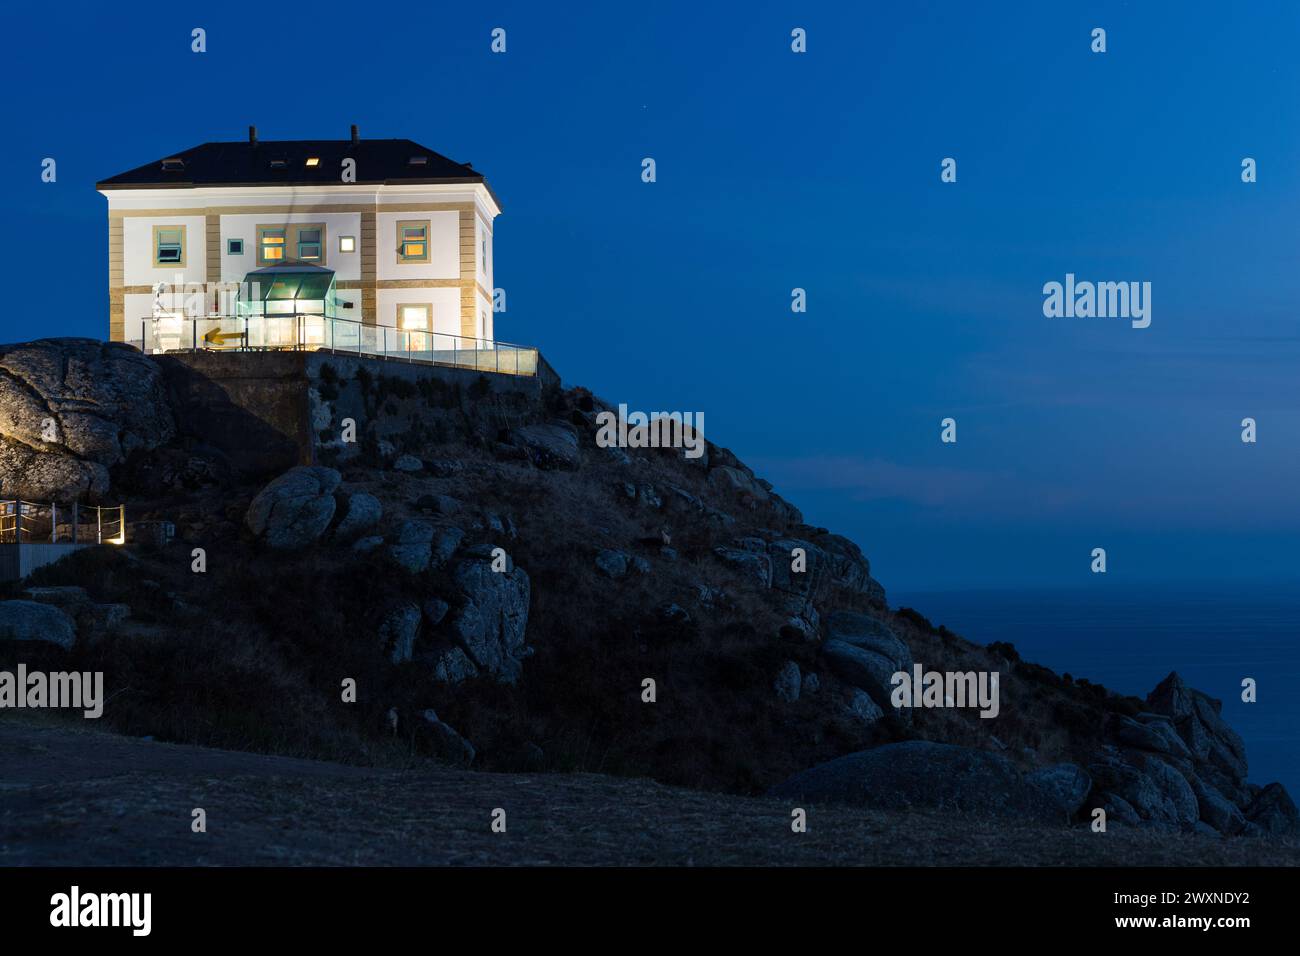 Cape Finisterre, illuminated building, evening sky and the ocean. A destination for pilgrims, was believed to be an end of the world. Galicia, Spain Stock Photo